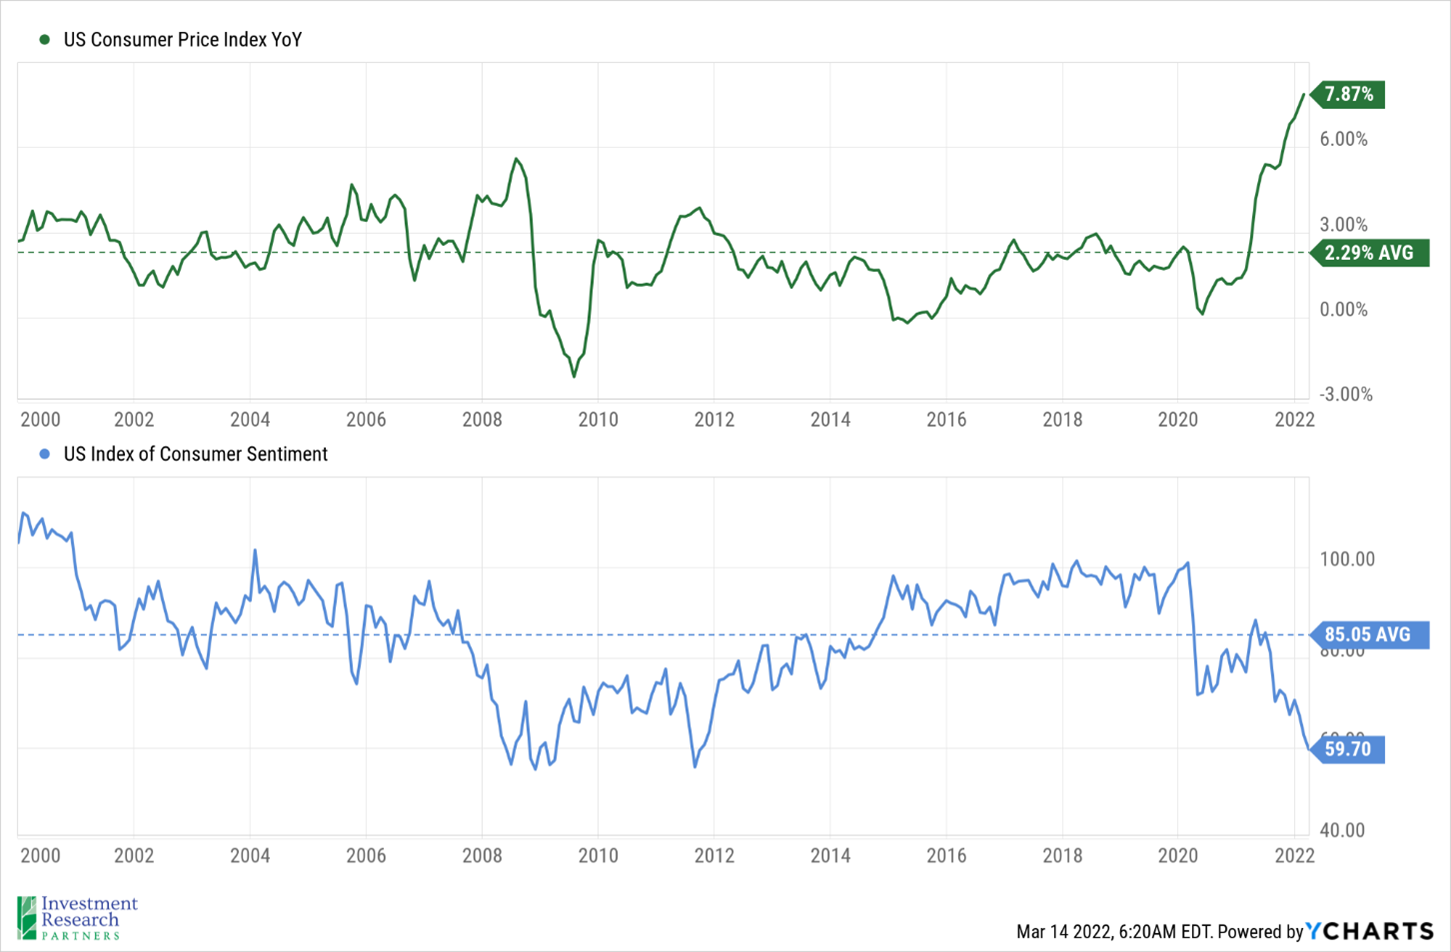 Line graphs depicting US Consumer Price Index YoY and US Index of Consumer Sentiment